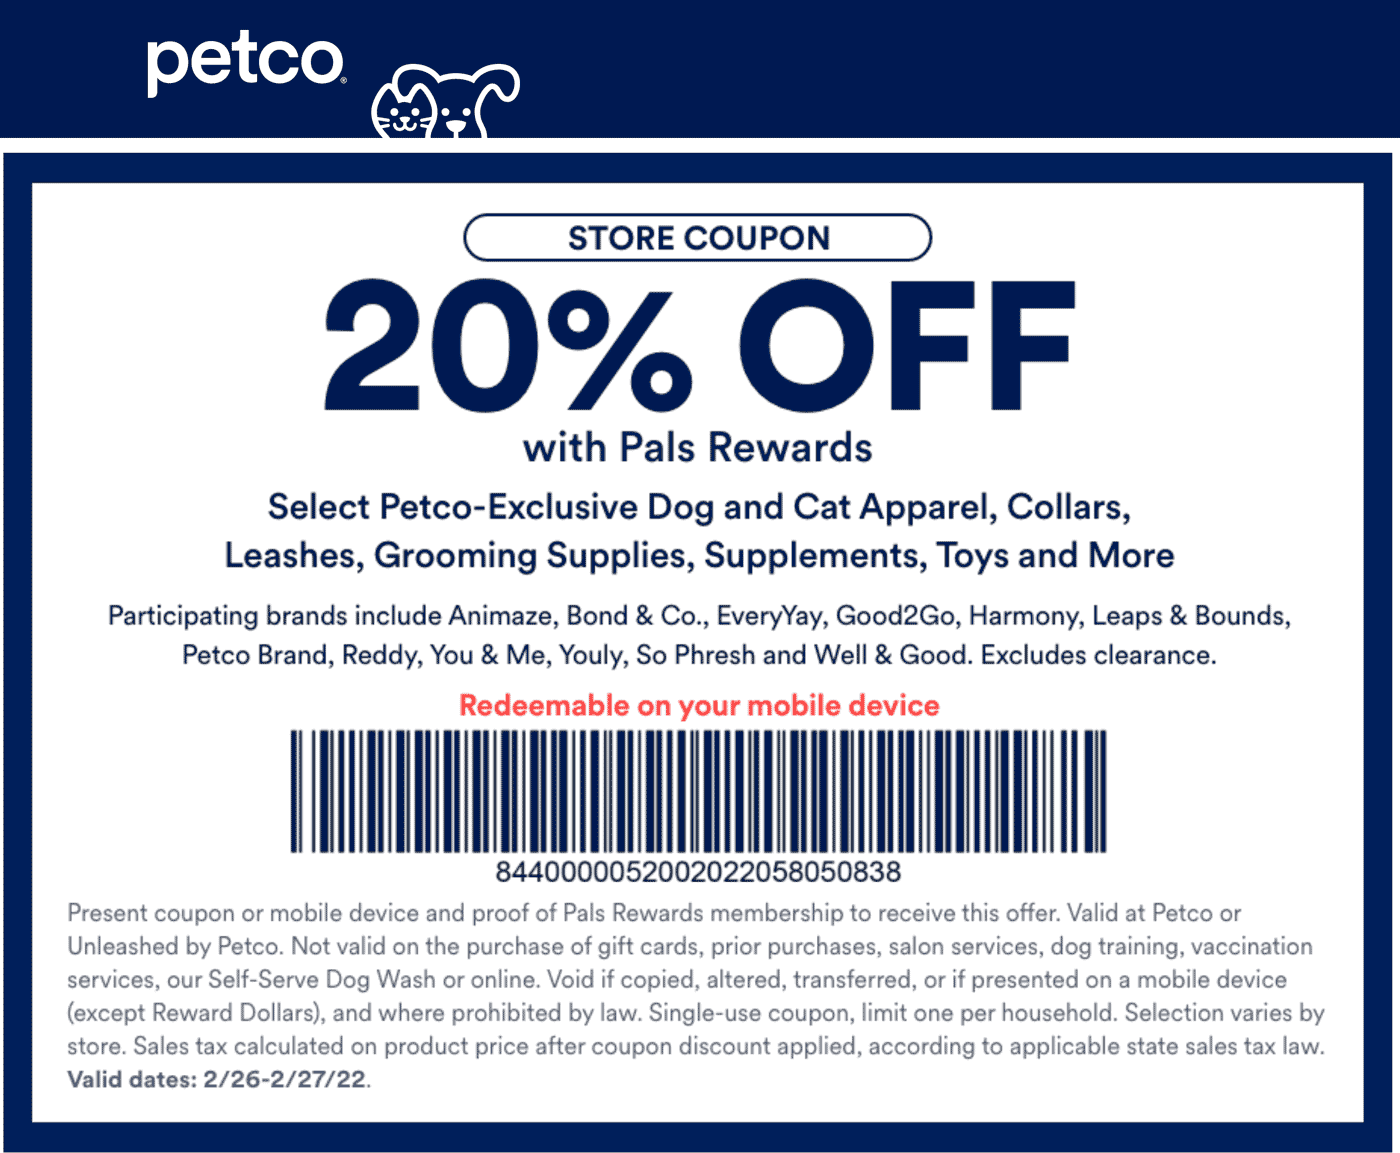 Petco coupons & promo code for [November 2022]